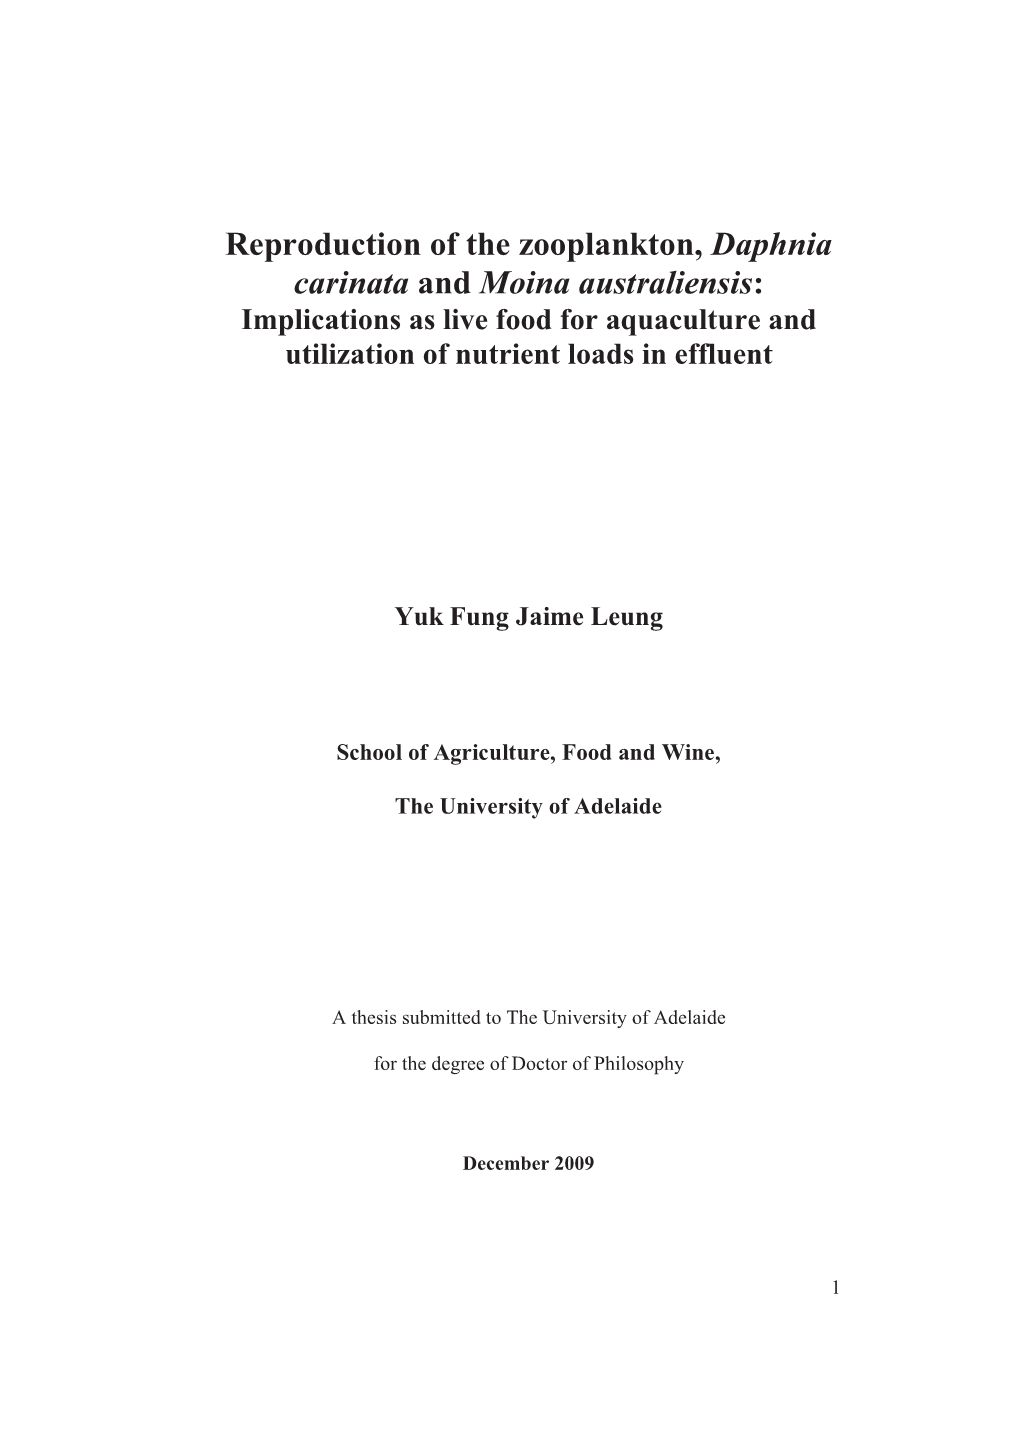 Reproduction of the Zooplankton, Daphnia Carinata and Moina Australiensis: Implications As Live Food for Aquaculture and Utilization of Nutrient Loads in Effluent